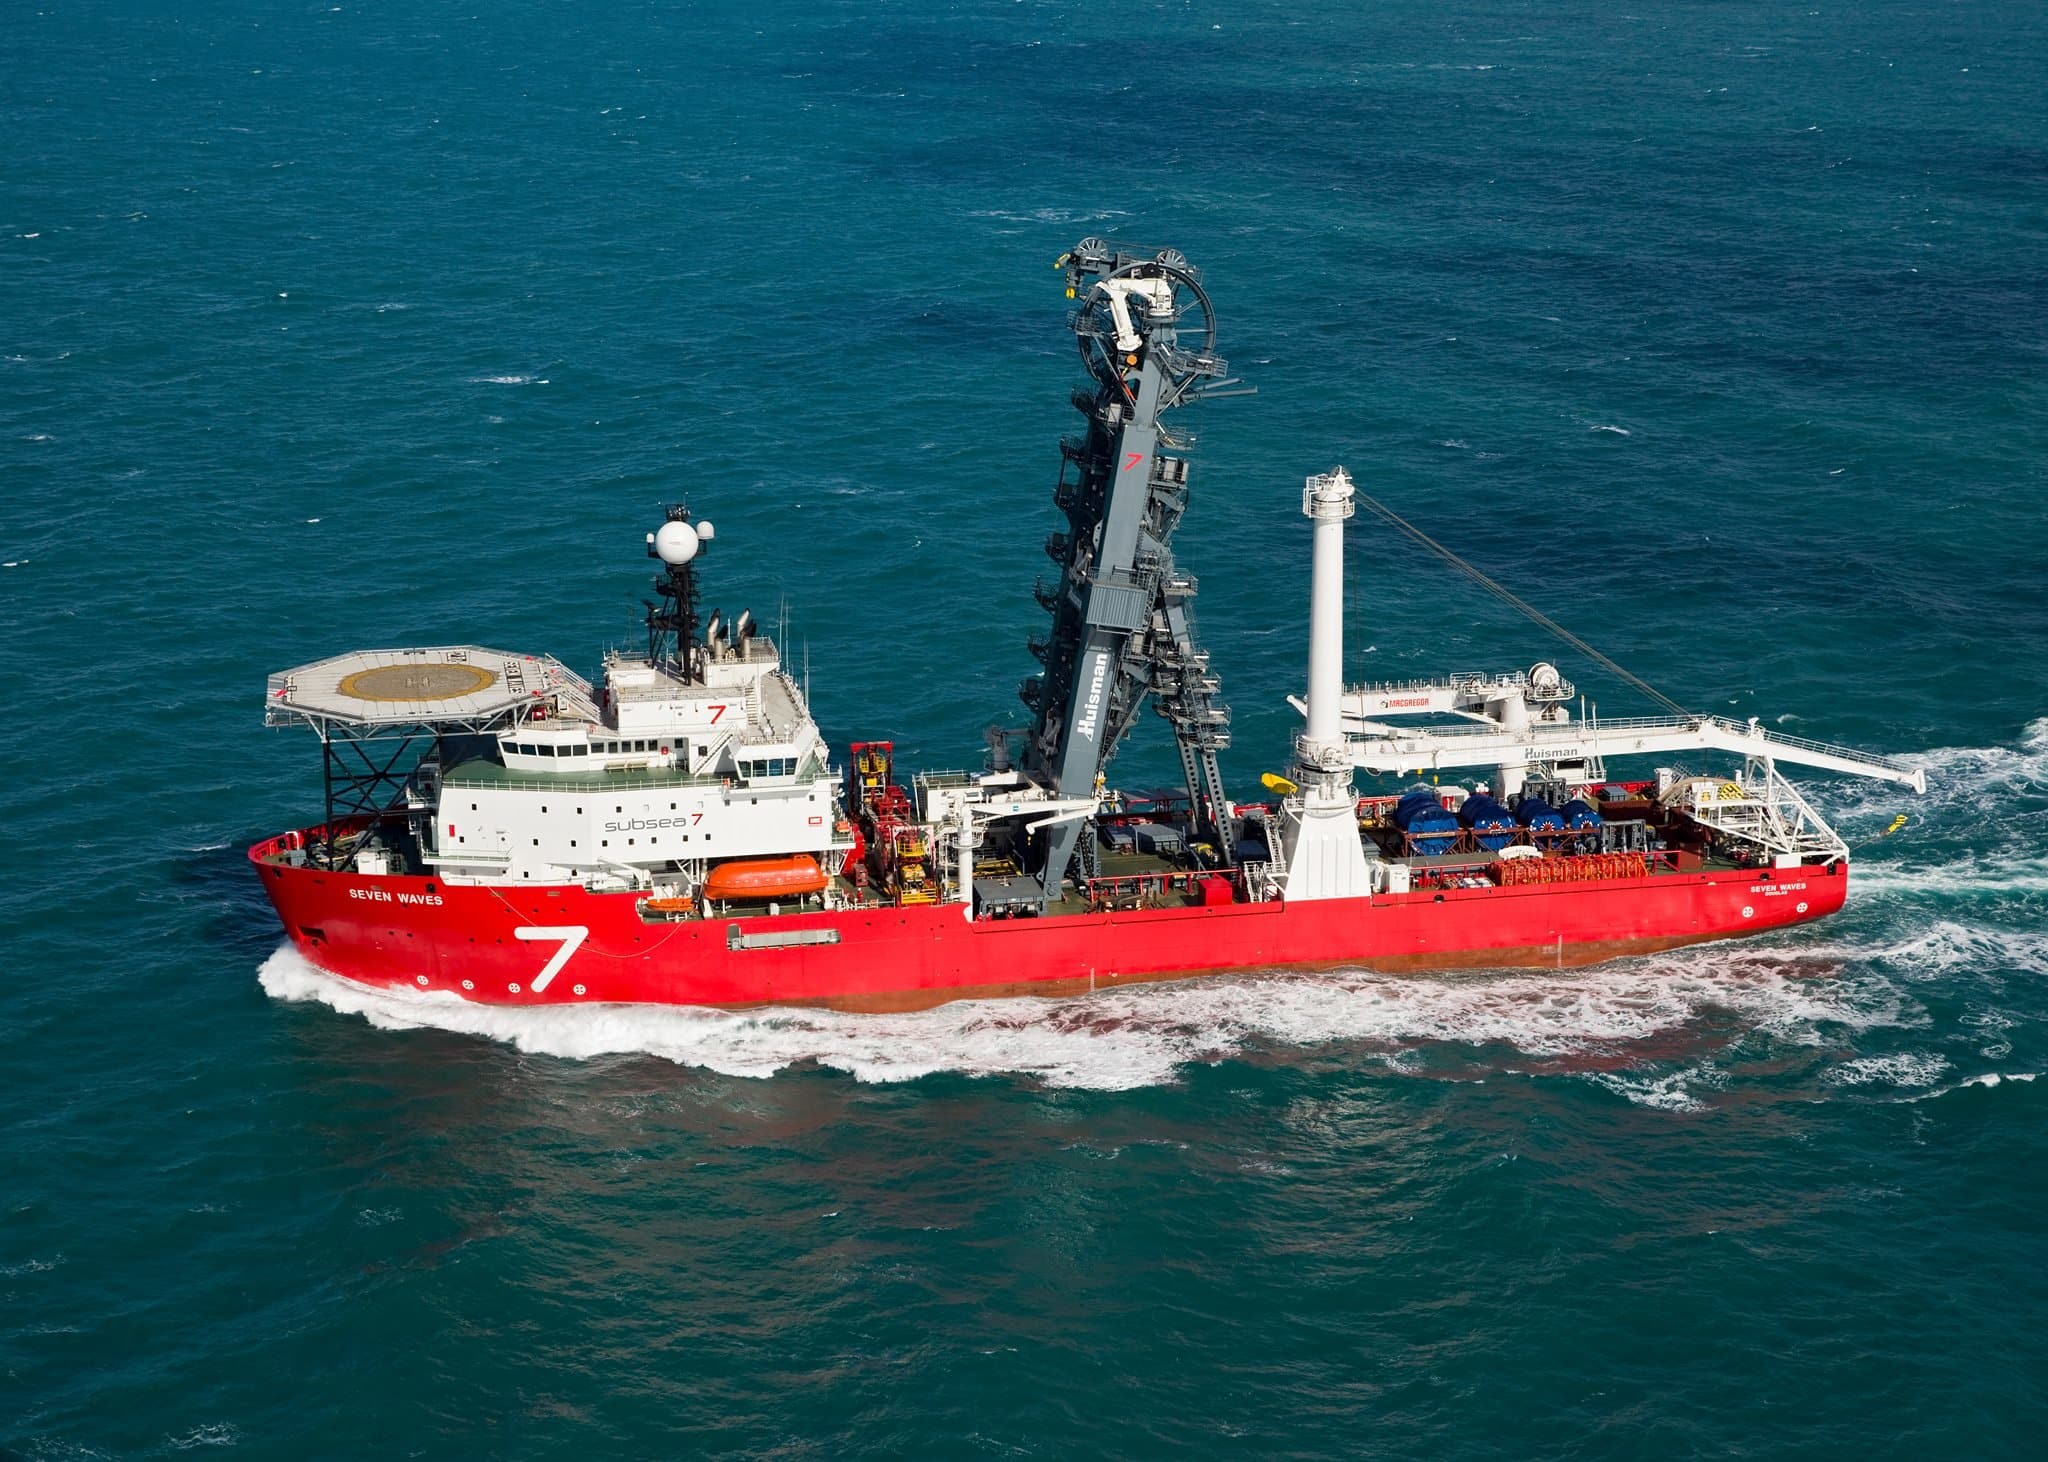 the Subsea 7 traveling in the ocean